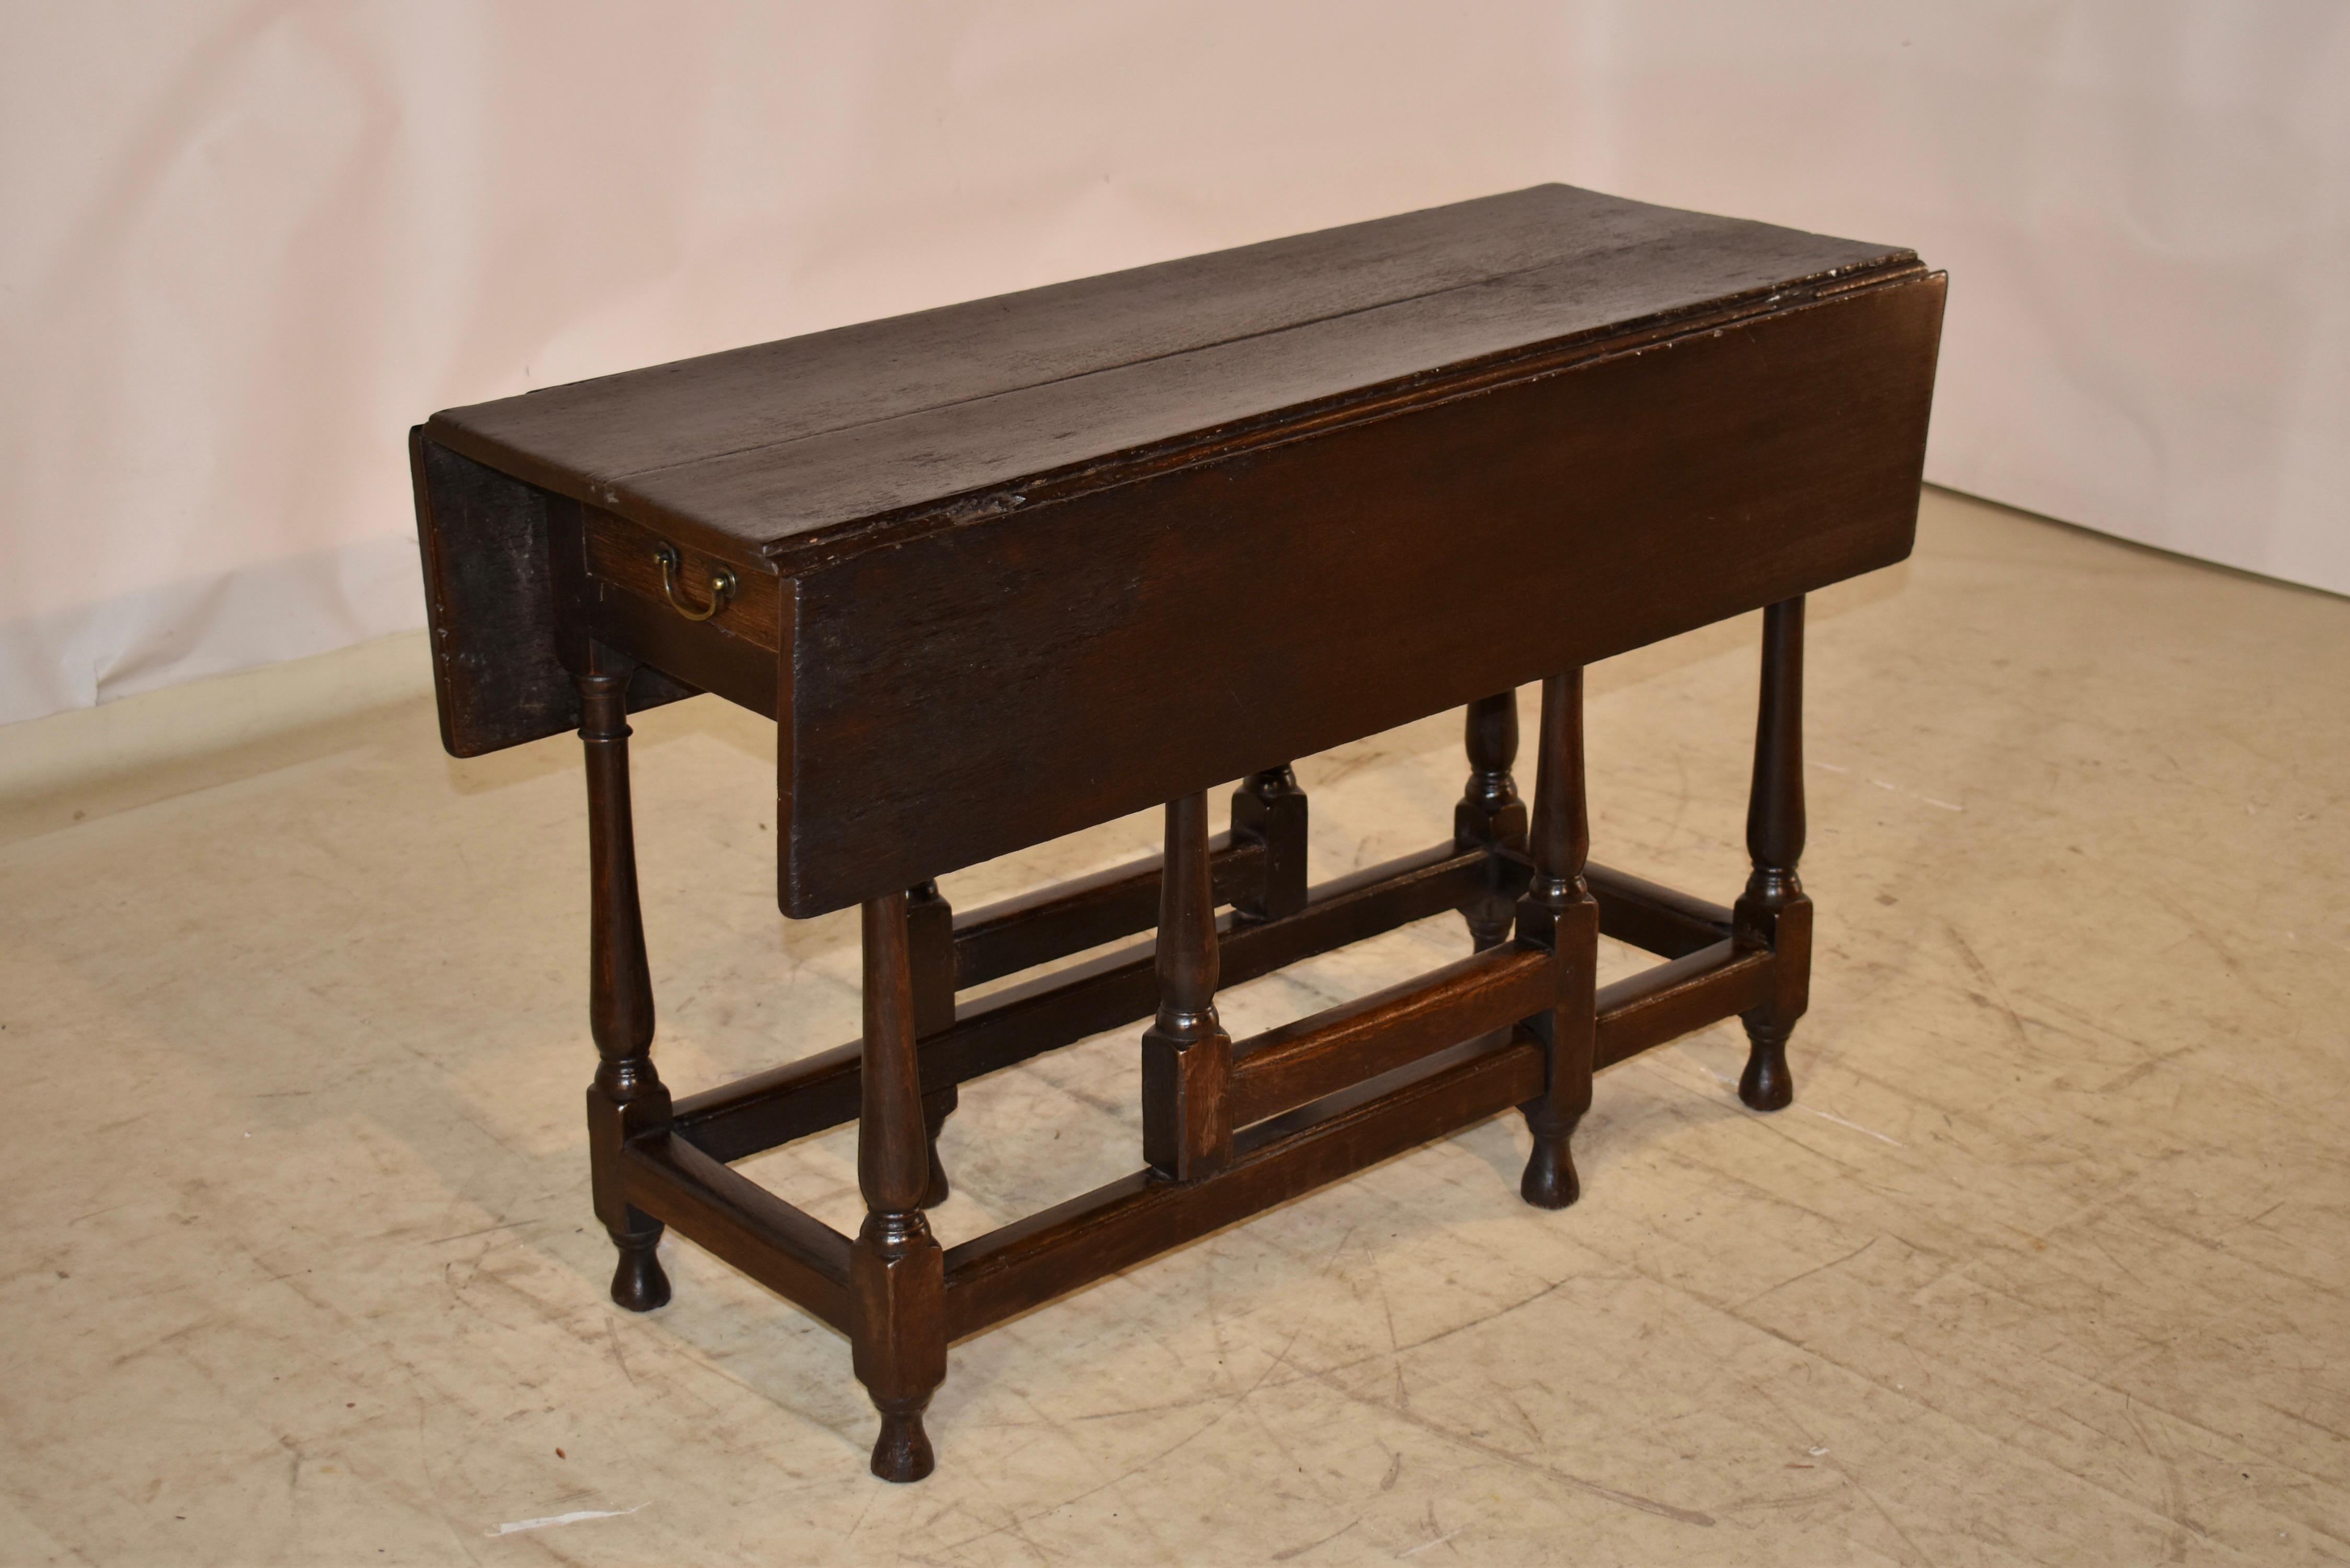 English Late 17th - Early 18th Century Drop Leaf Table from England For Sale